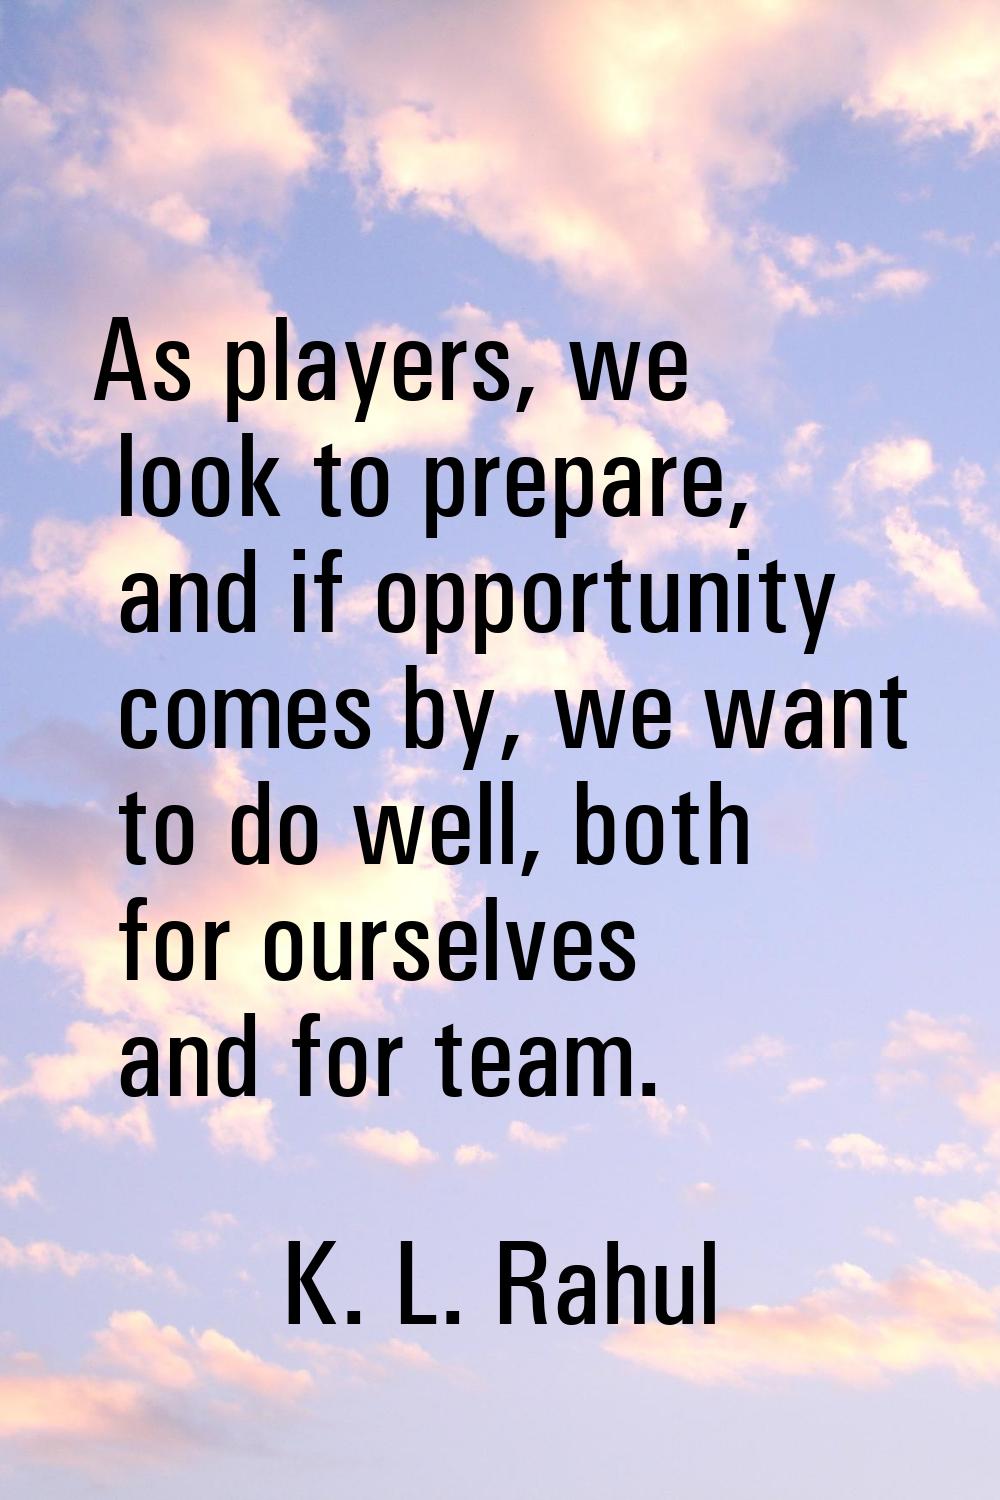 As players, we look to prepare, and if opportunity comes by, we want to do well, both for ourselves